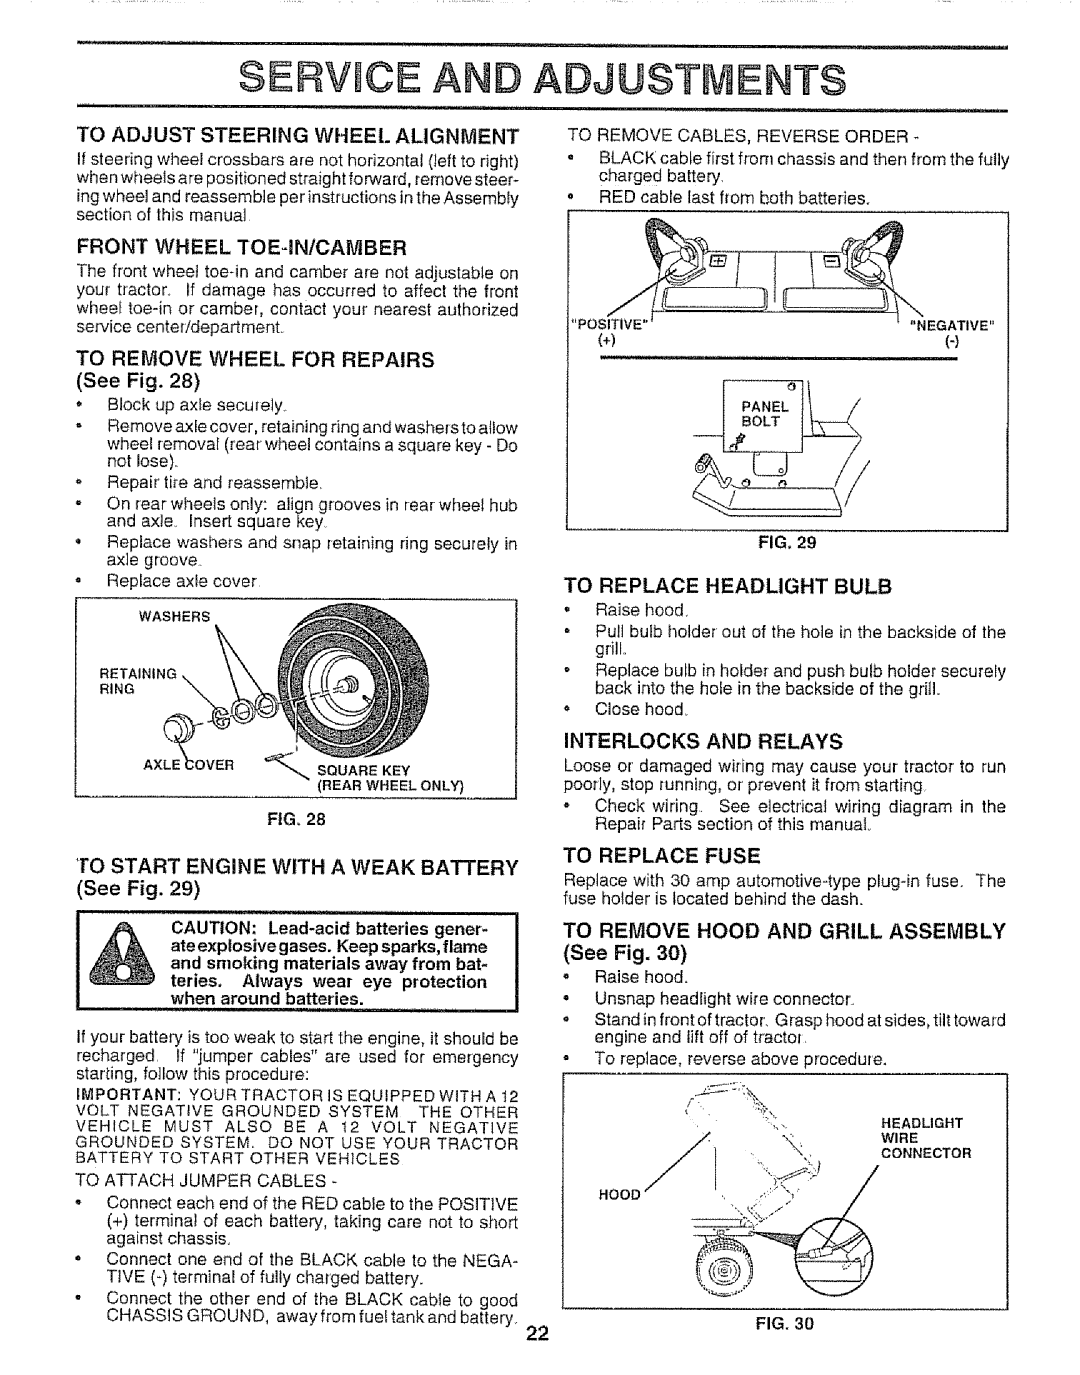 Sears 917.257651 Serwce And Adjustments, To Adjust Steering Wheel Alignment, Front Wheel Toe=In/Camber, To Replace Fuse 